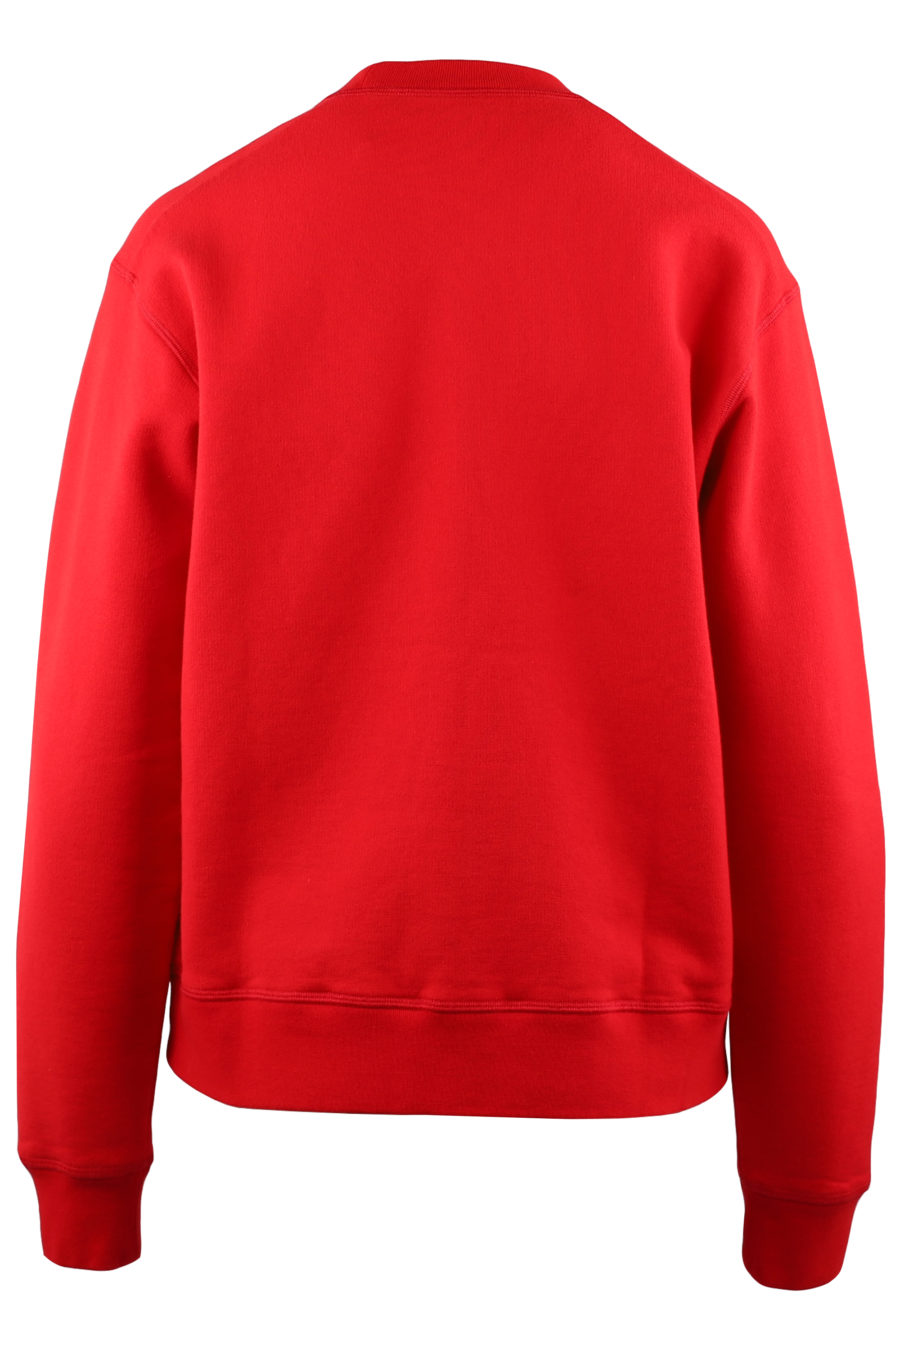 Red sweatshirt with white "Icon" logo - d1a1ade338db9a20c5168c8e93085fce310626868c